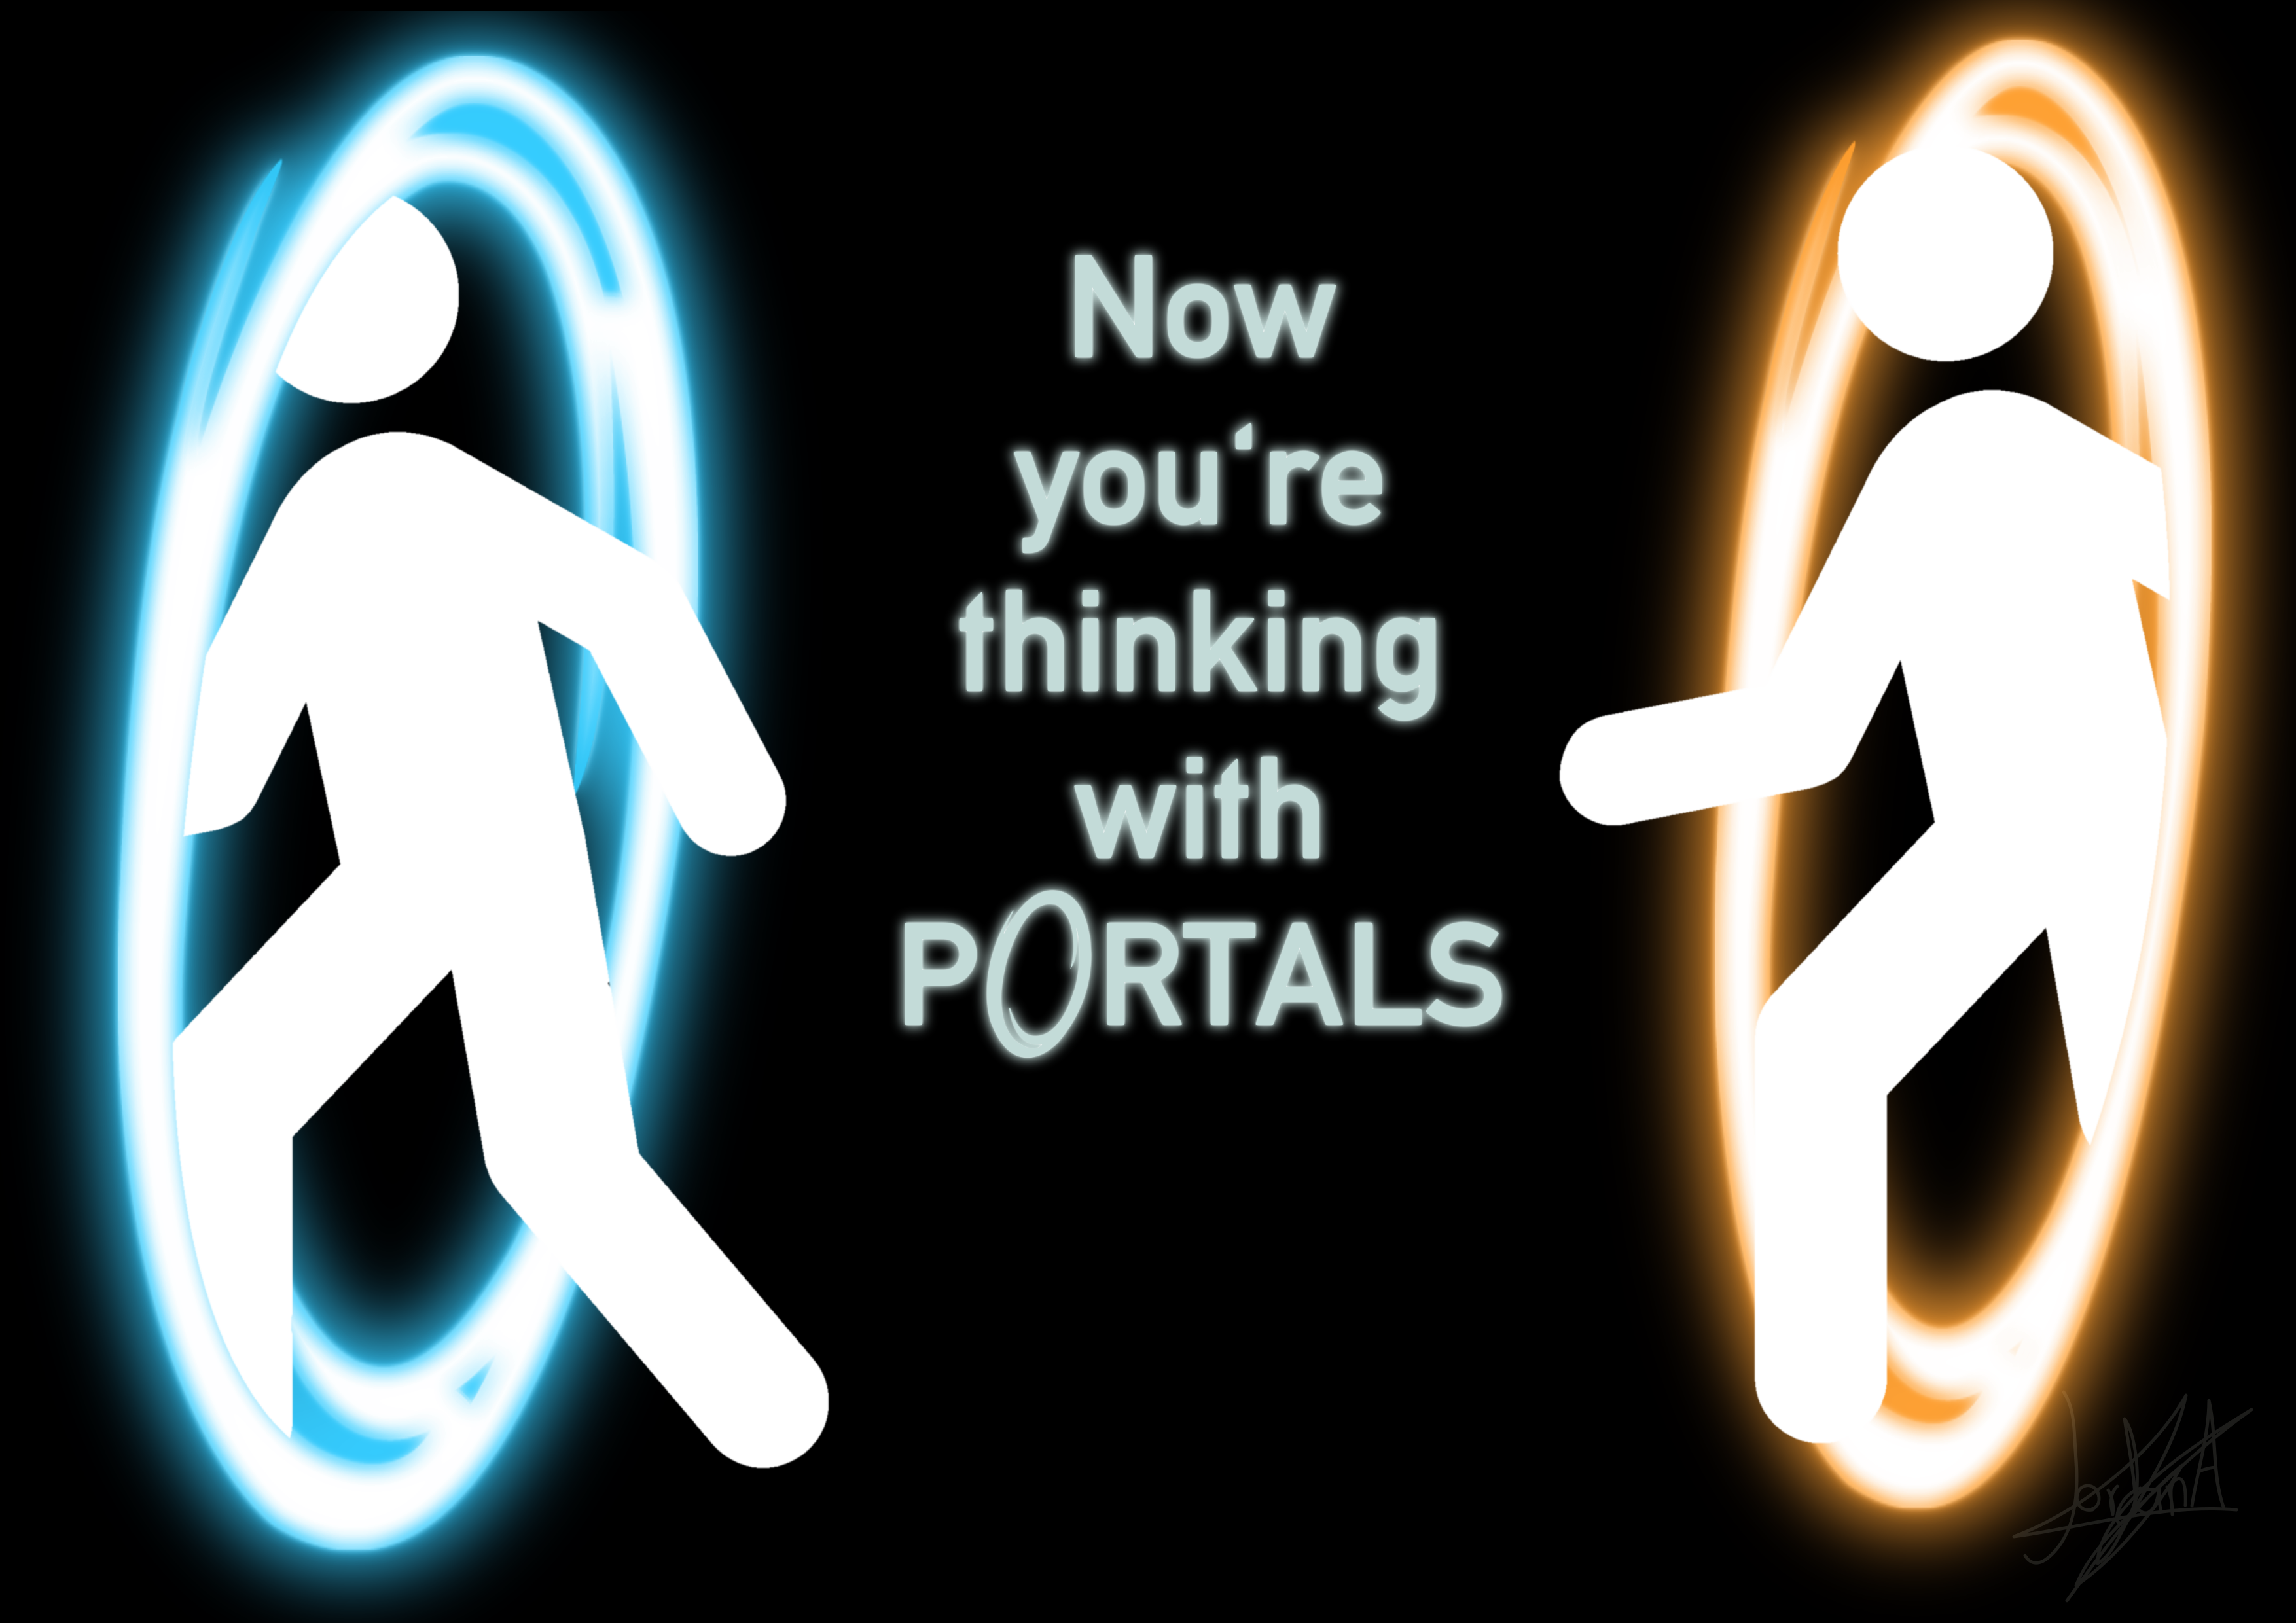 Now you are thinking with portals.